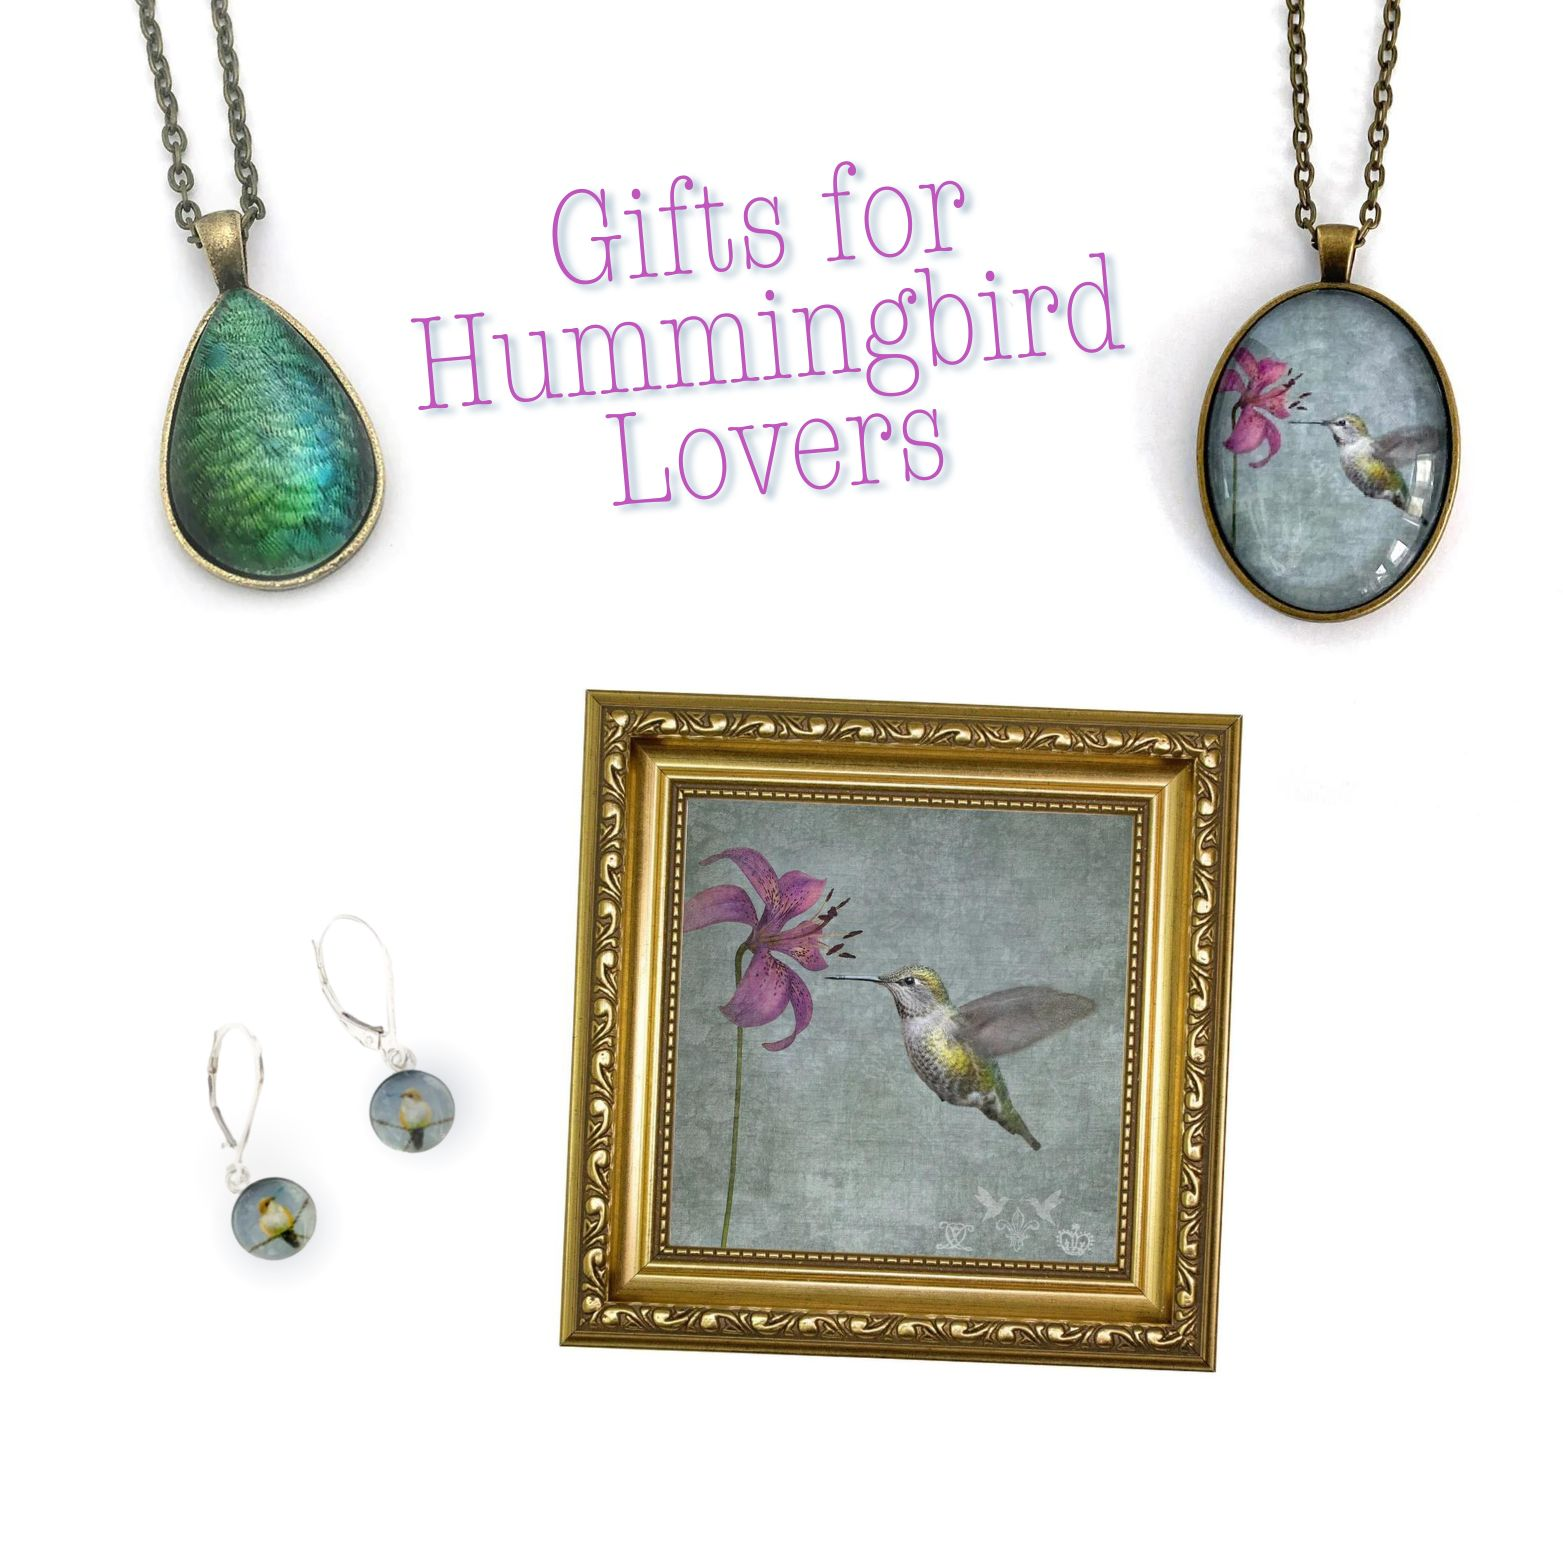 For anyone who loves hummingbirds, these gifts will surprise and delight. Create a gift box with an arrangement of items.